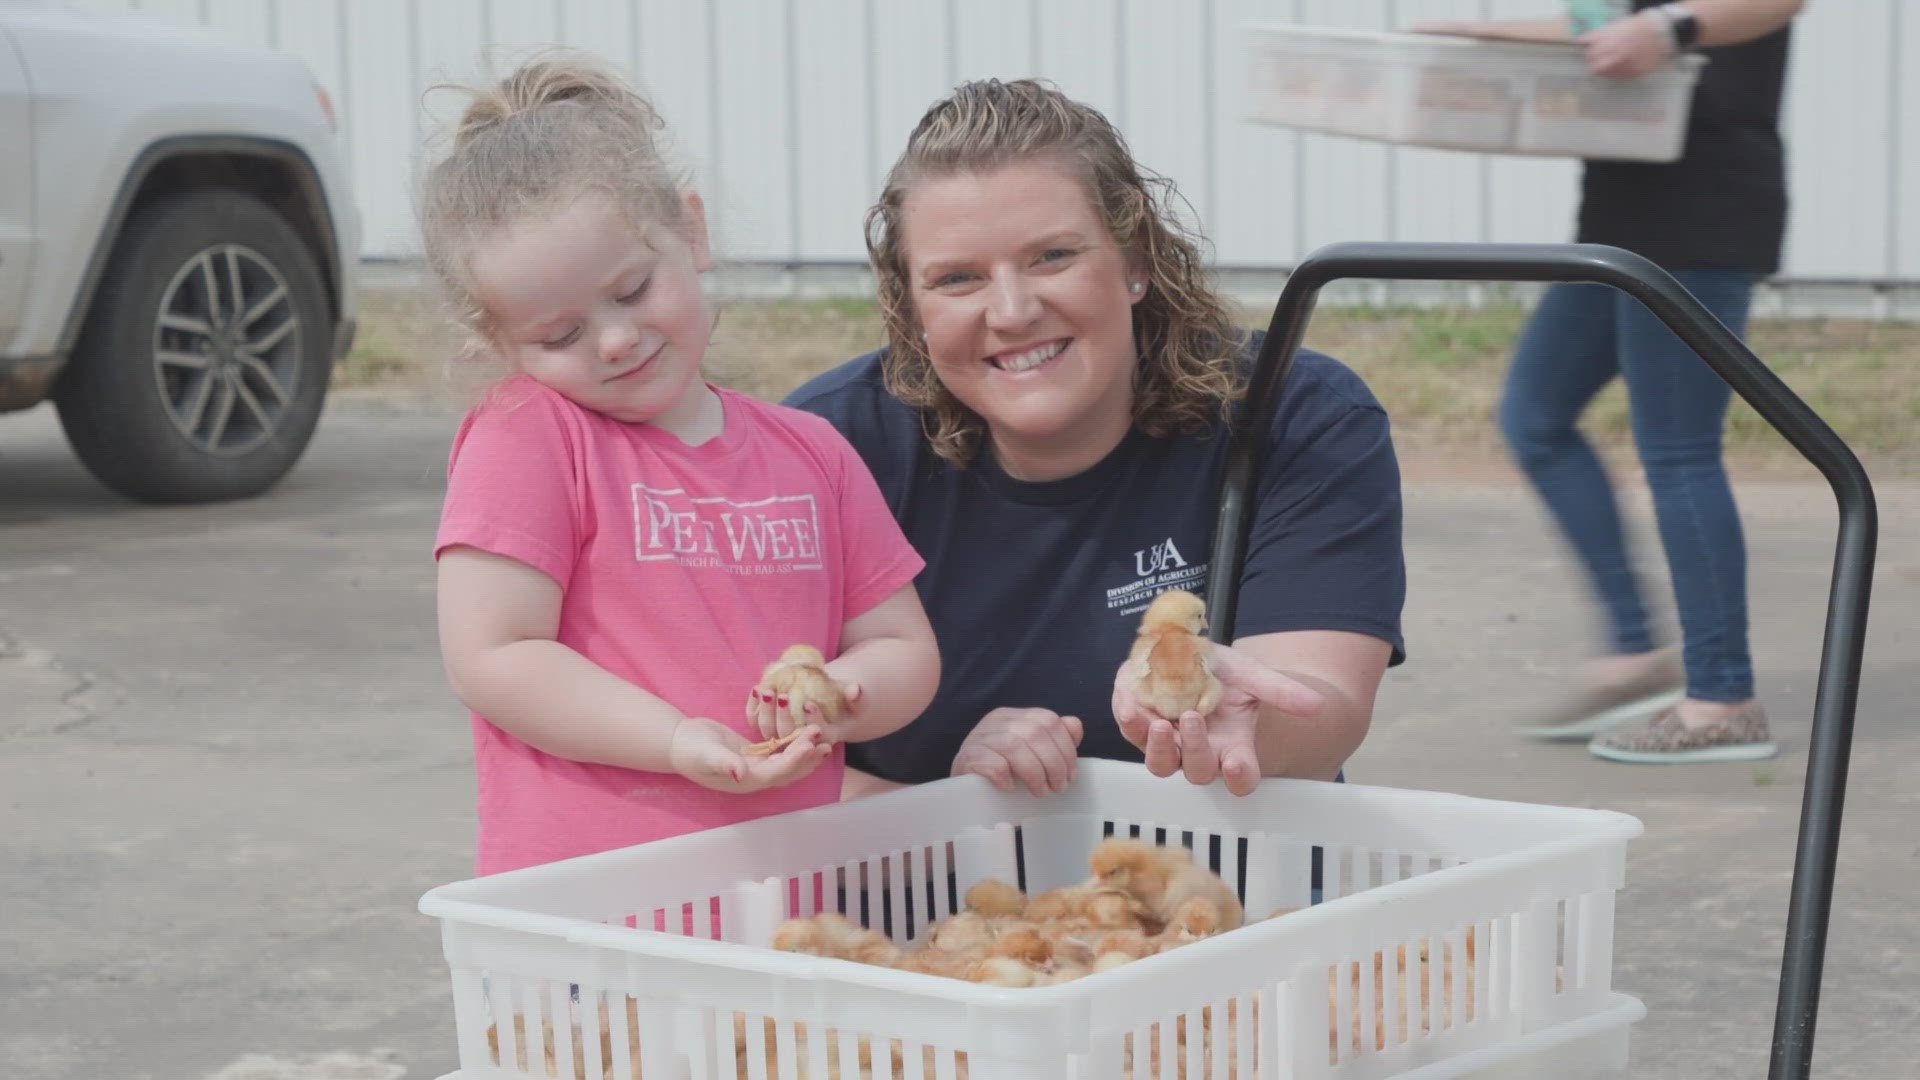 Over 1,900 participants from 70 counties received flocks of 17 chicks each on Wednesday.